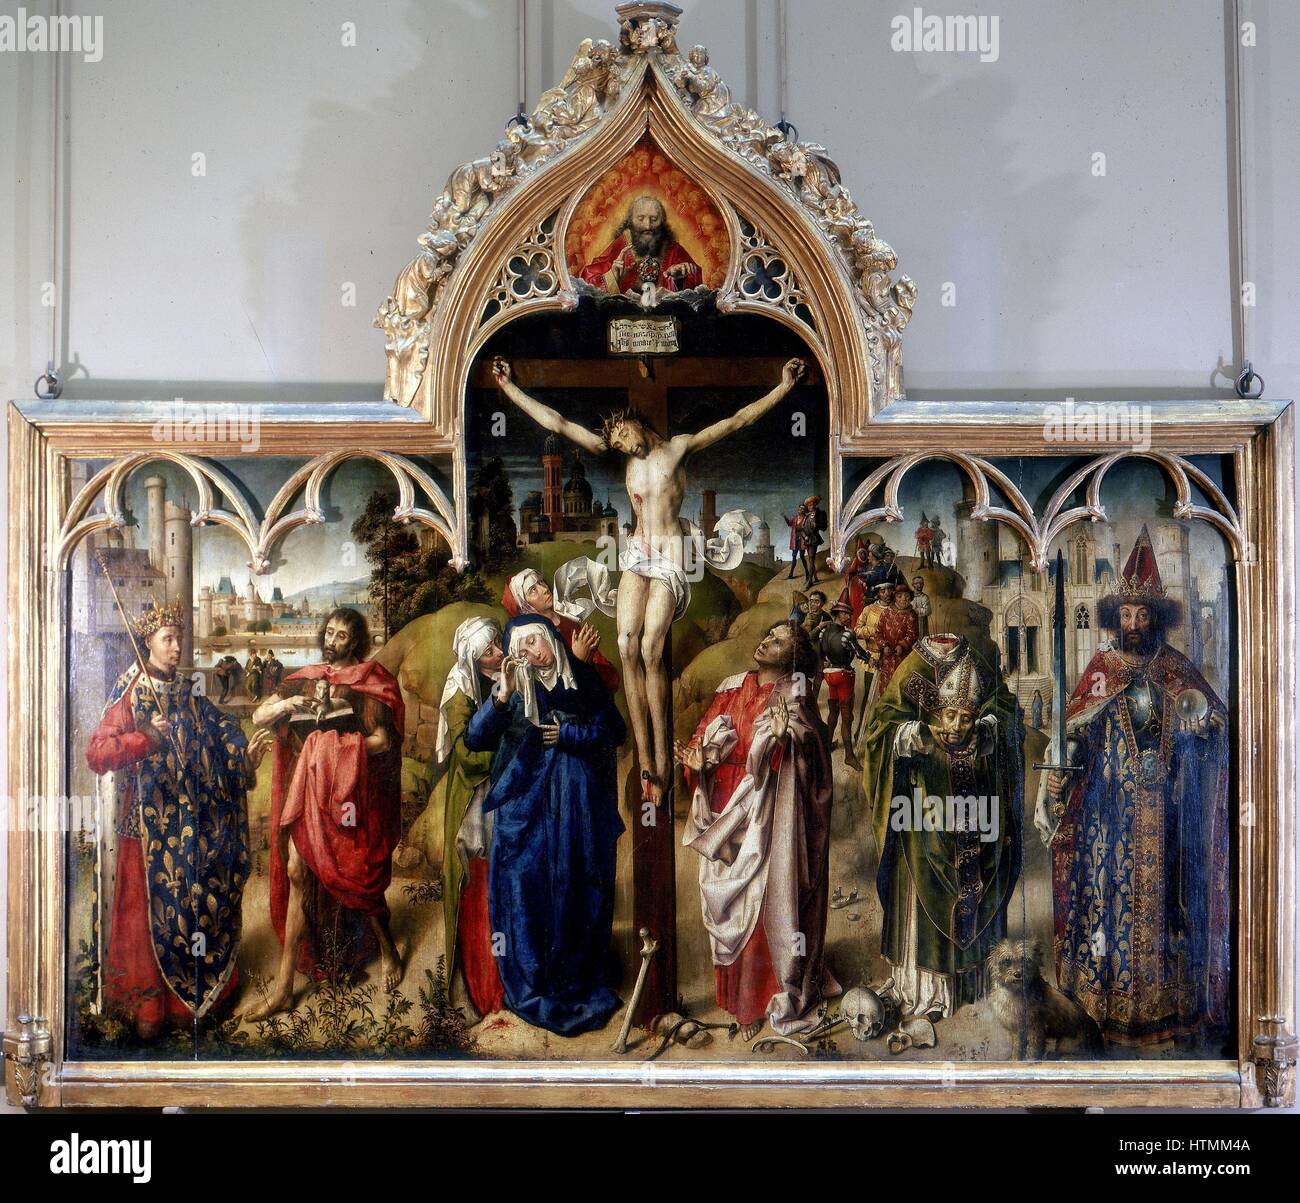 ANONYMOUS, 15th century. Paris Altarpiece. Louvre, Paris. Christ crucified, centre, with Virgin Mary and St John the Apostle on left and right of cross. 2nd from left, St John the Baptist. 2nd from right, St Denis, patron saint of Paris, carrying his hea Stock Photo